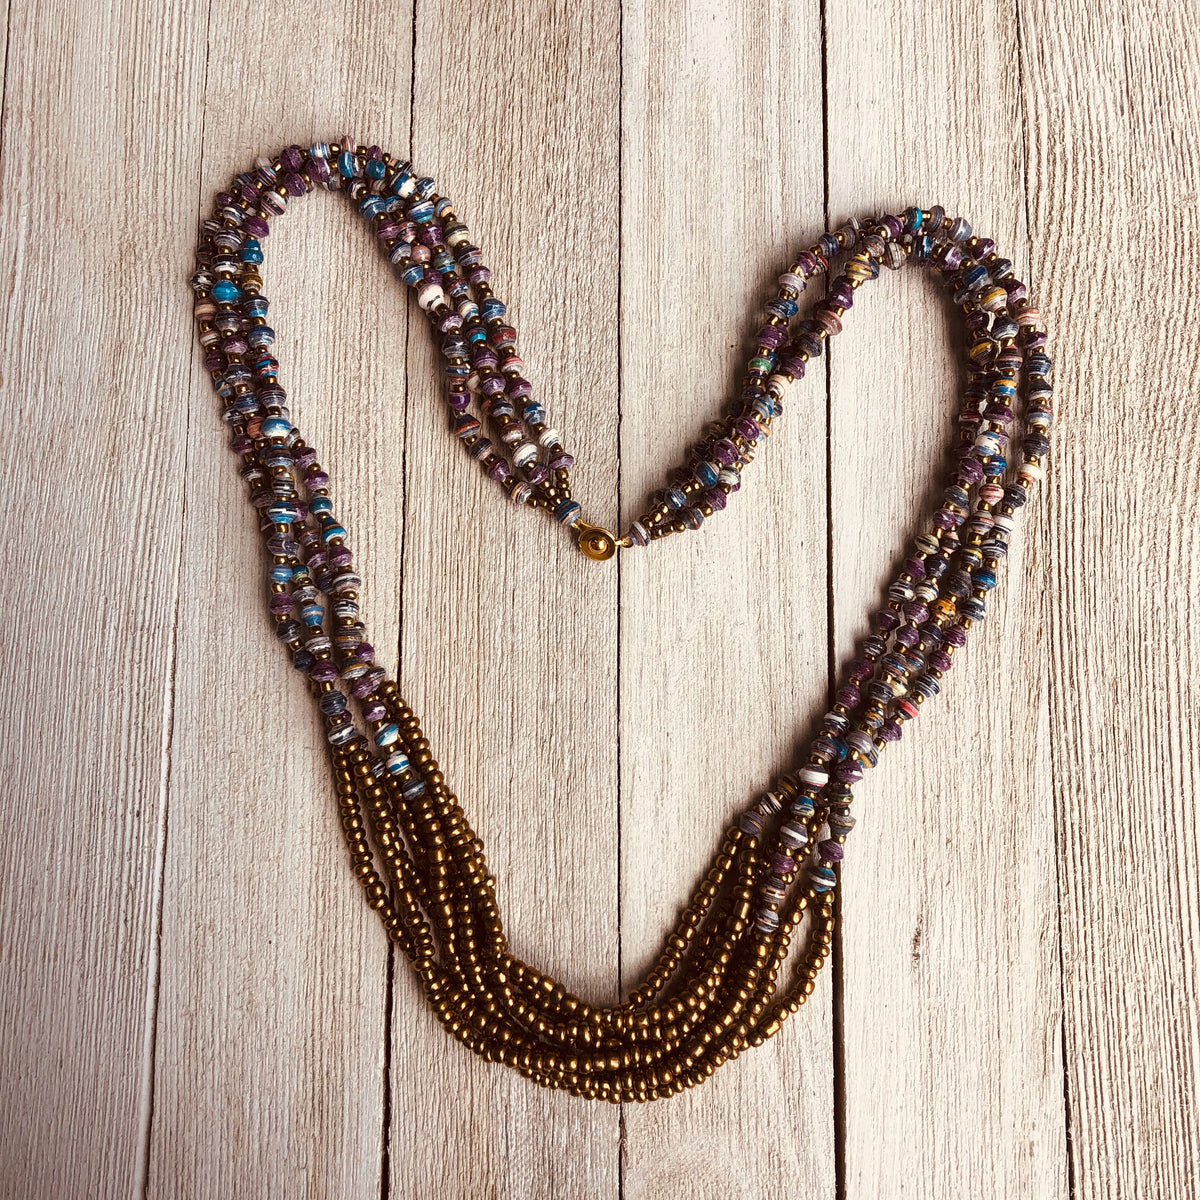 Unique Signature Handmade Beaded Multi Strand Necklace with Knot (Multi Color)